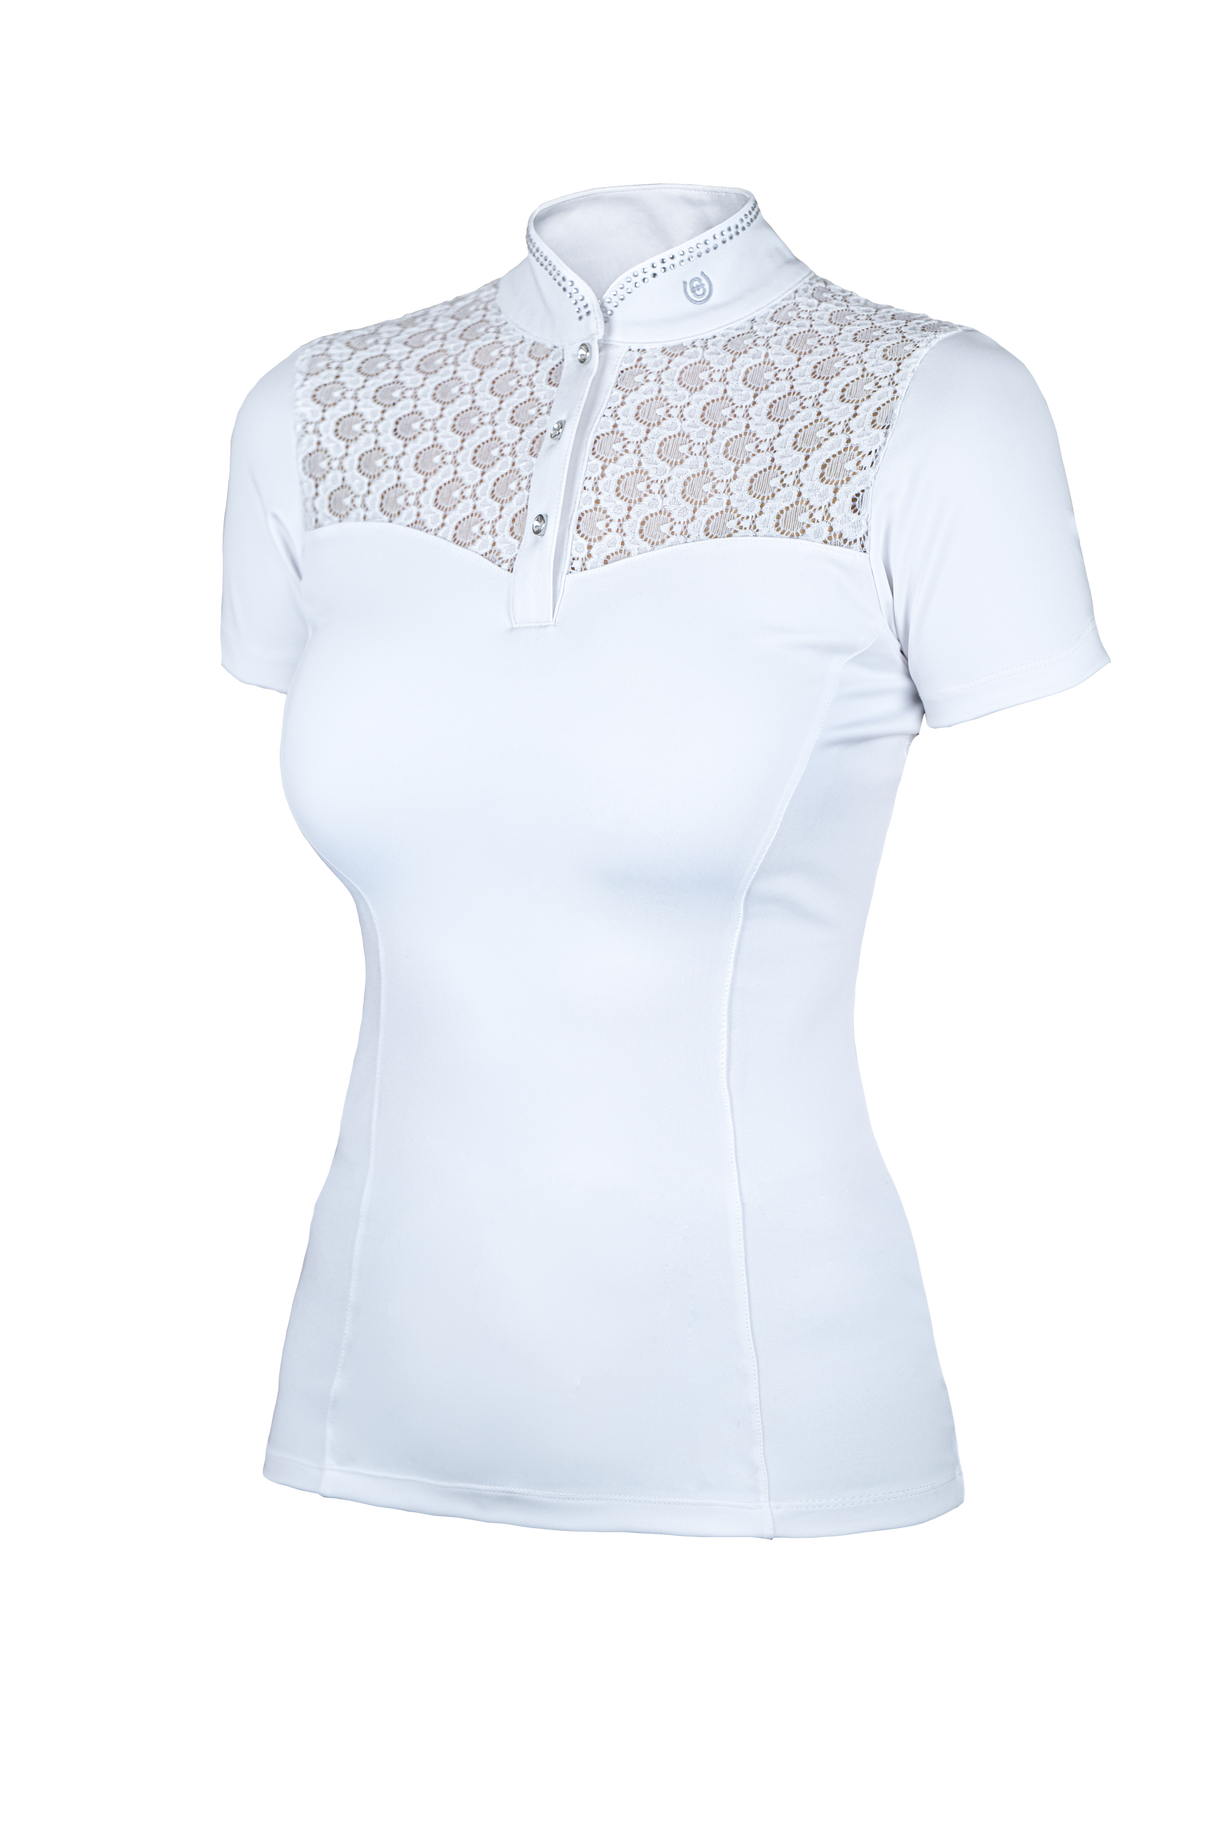 Equestrian Stockholm Crystal Champion Short-Sleeve Top White